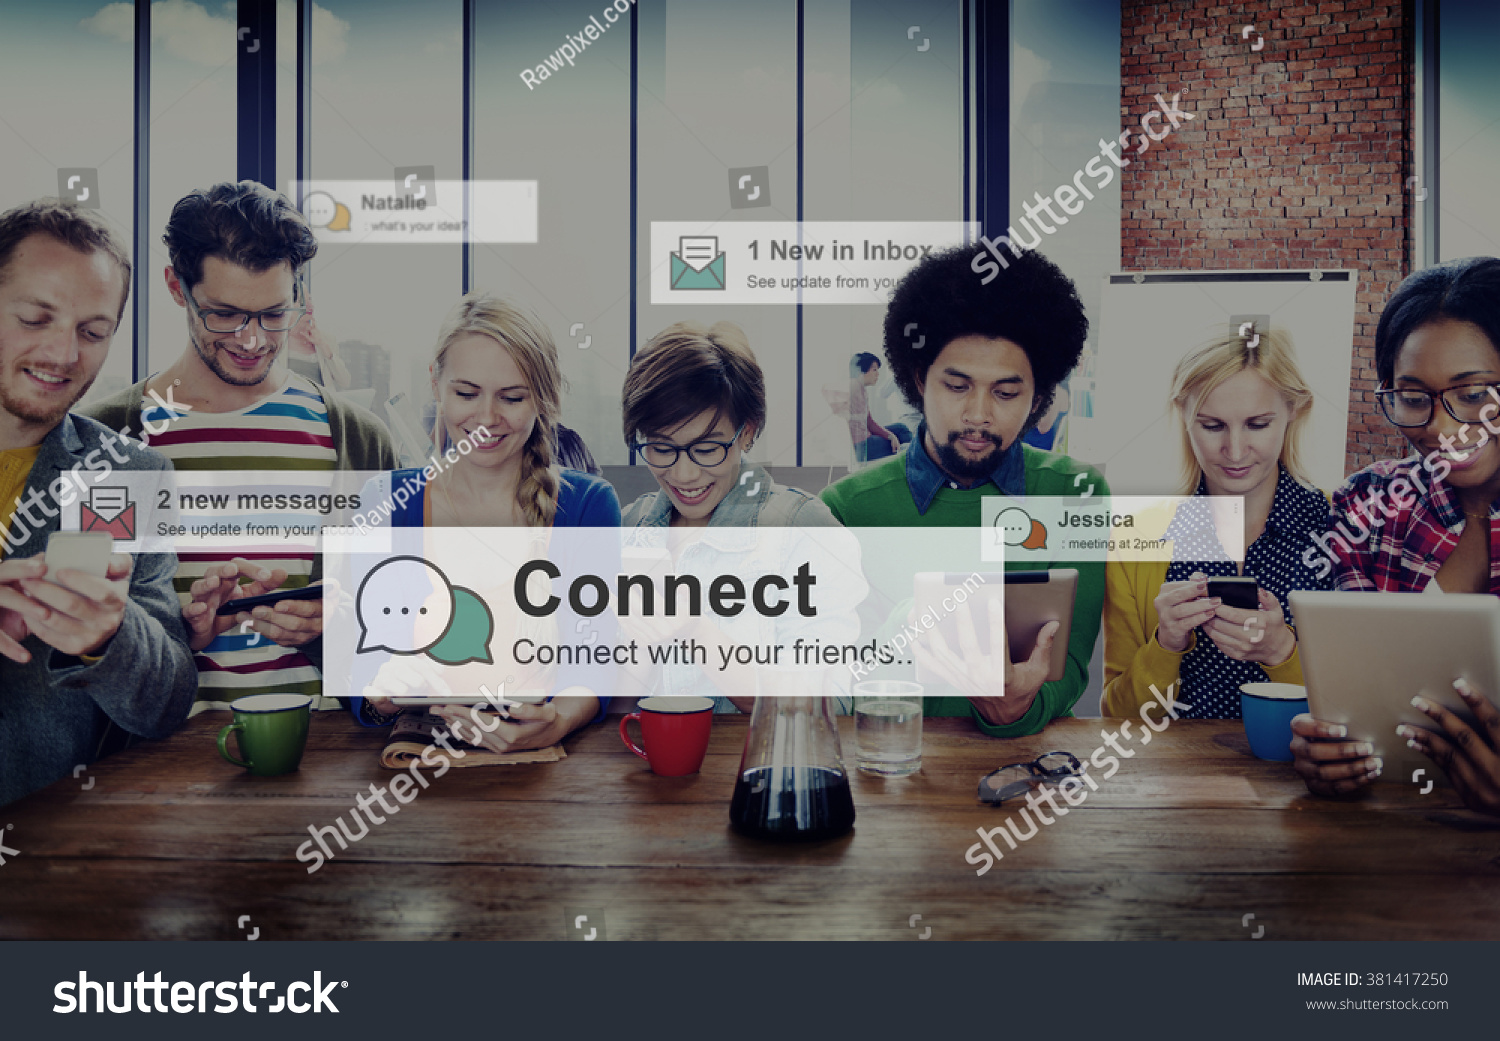 Connect Connection Social Network Media Concept #381417250